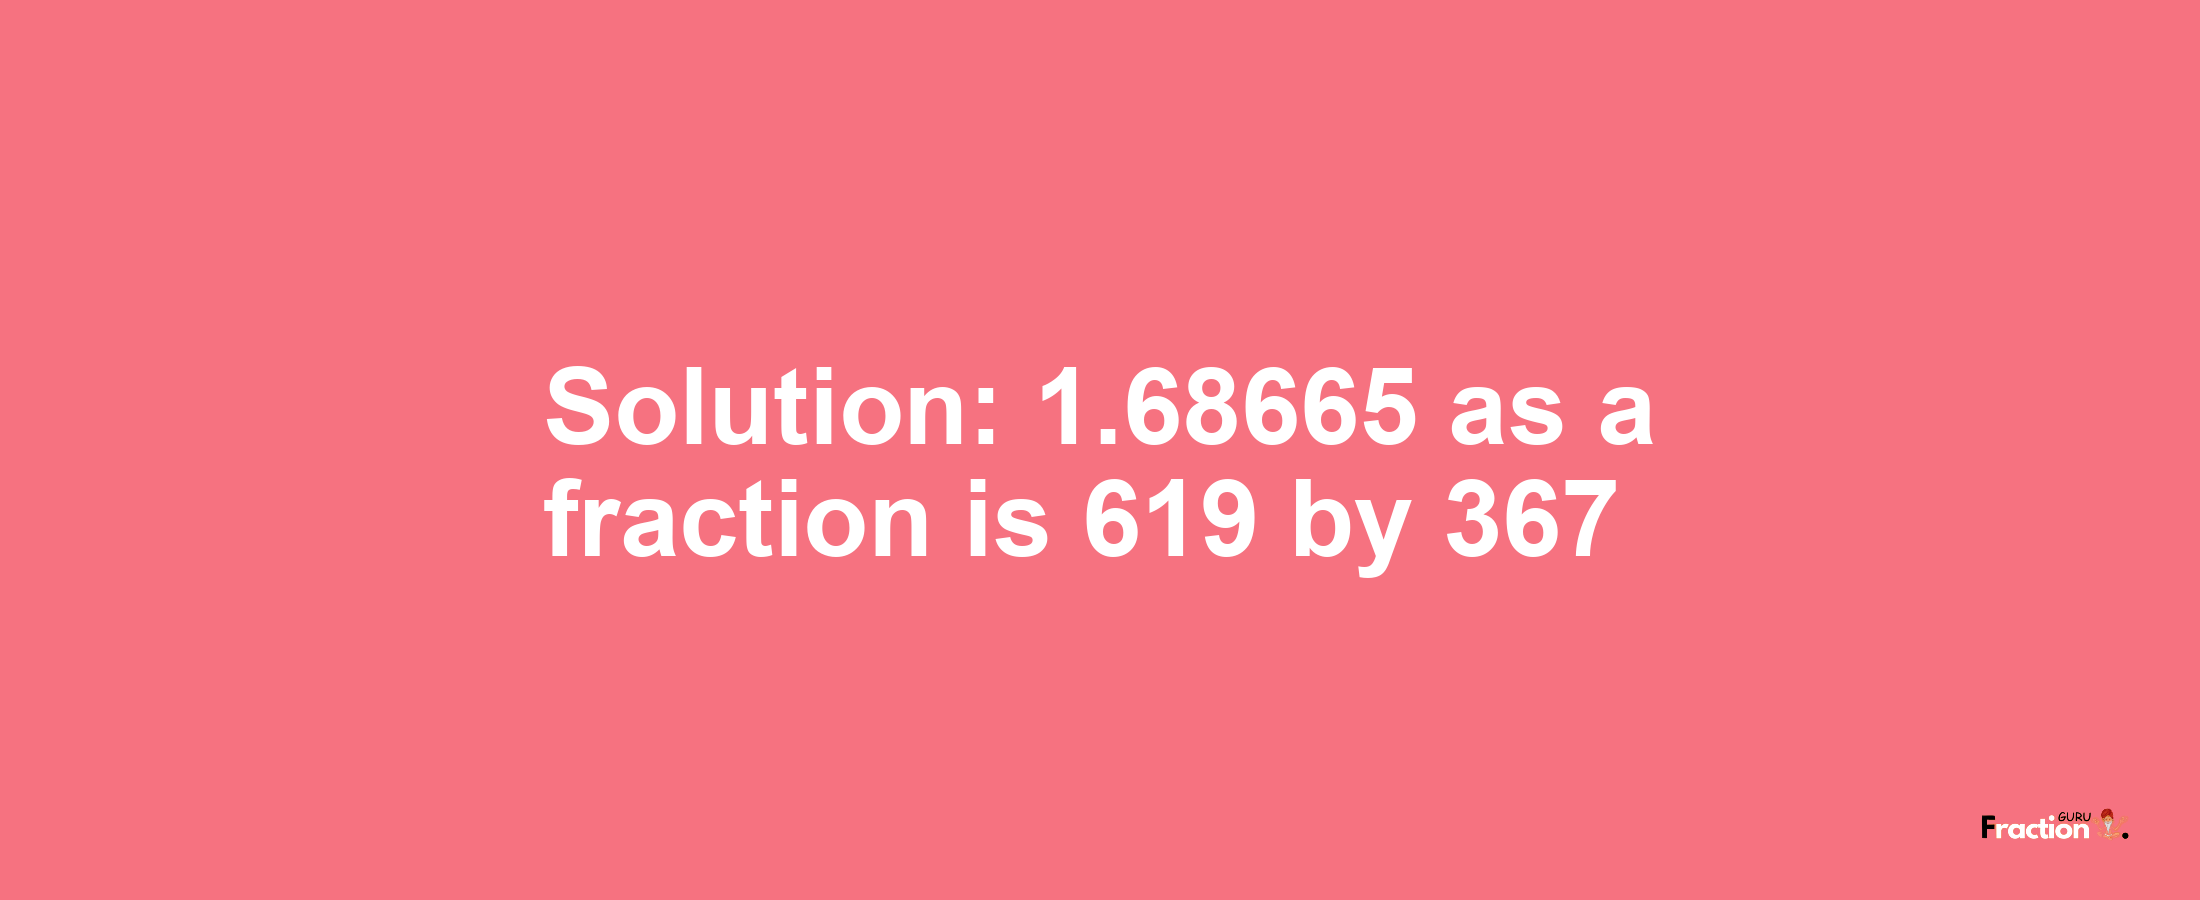 Solution:1.68665 as a fraction is 619/367